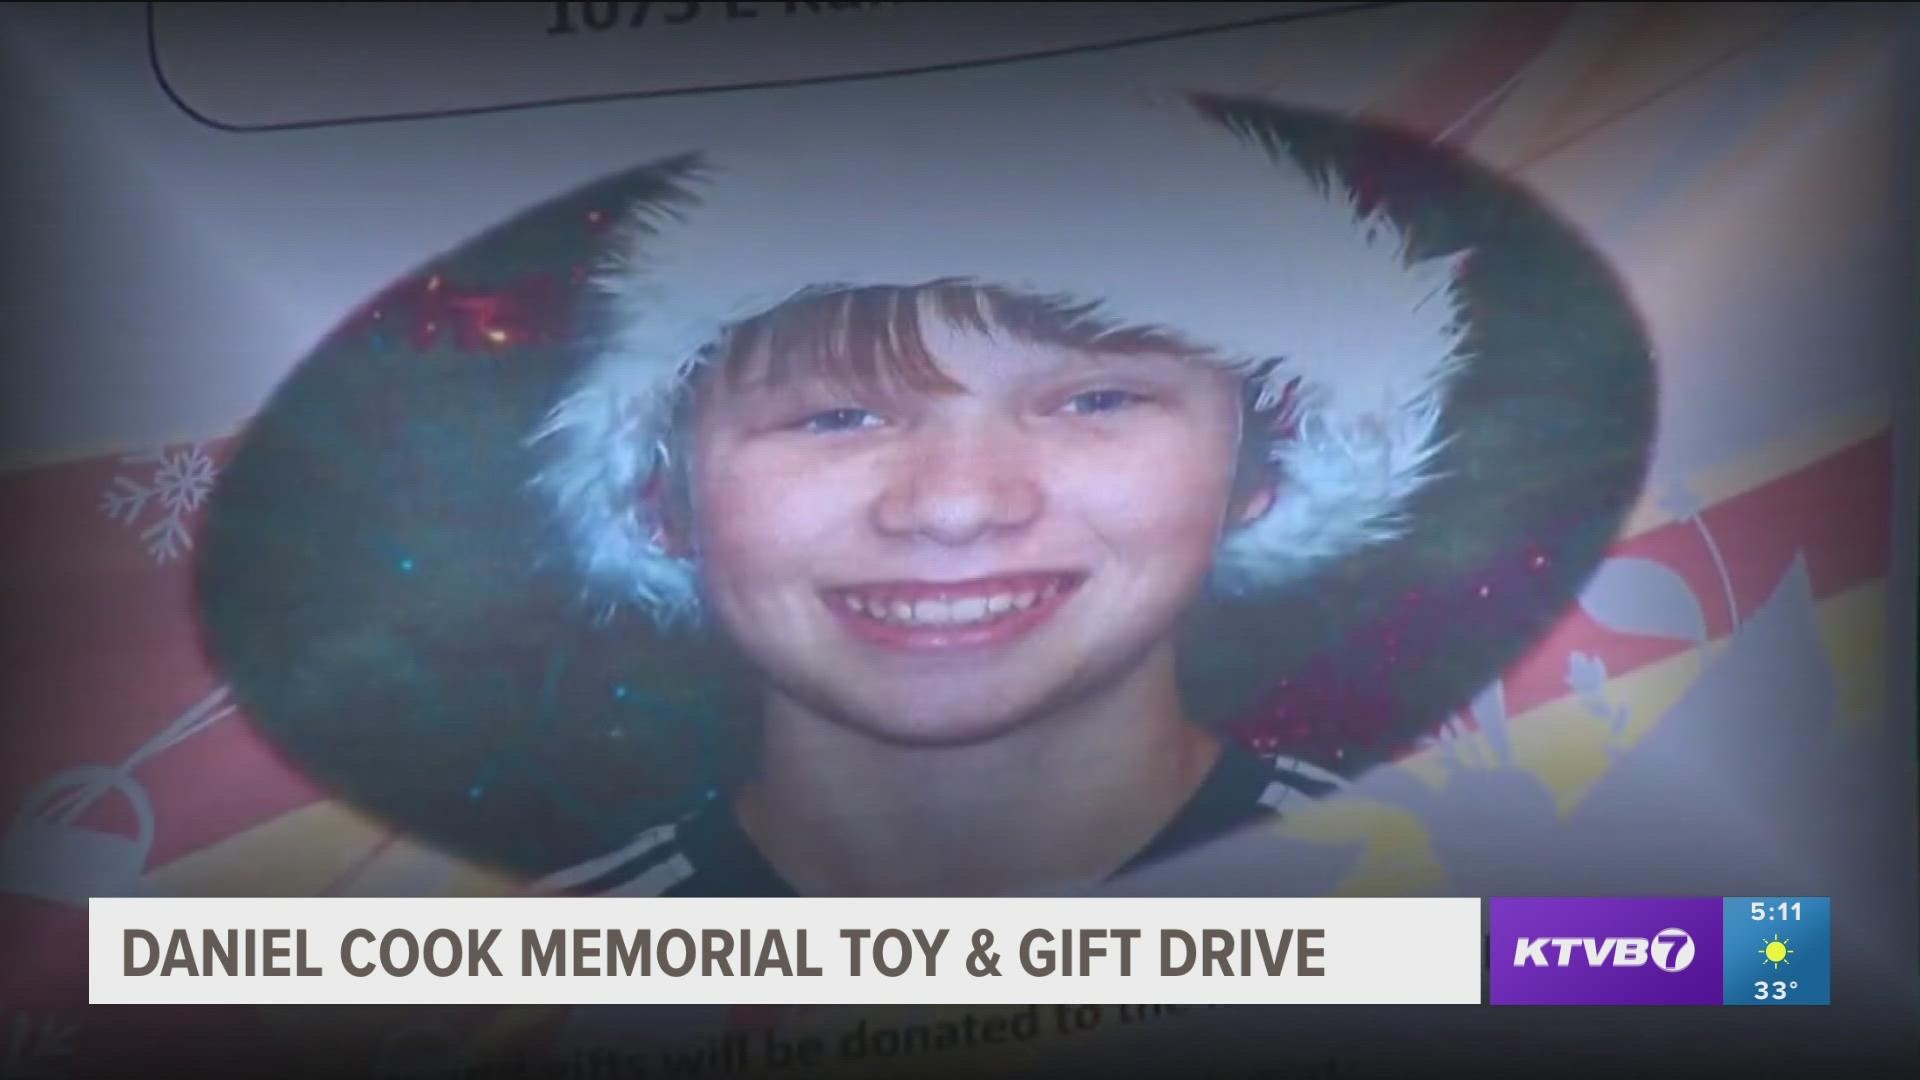 The Cook family is holding its ninth annual toy and gift drive in honor of Daniel Cook.